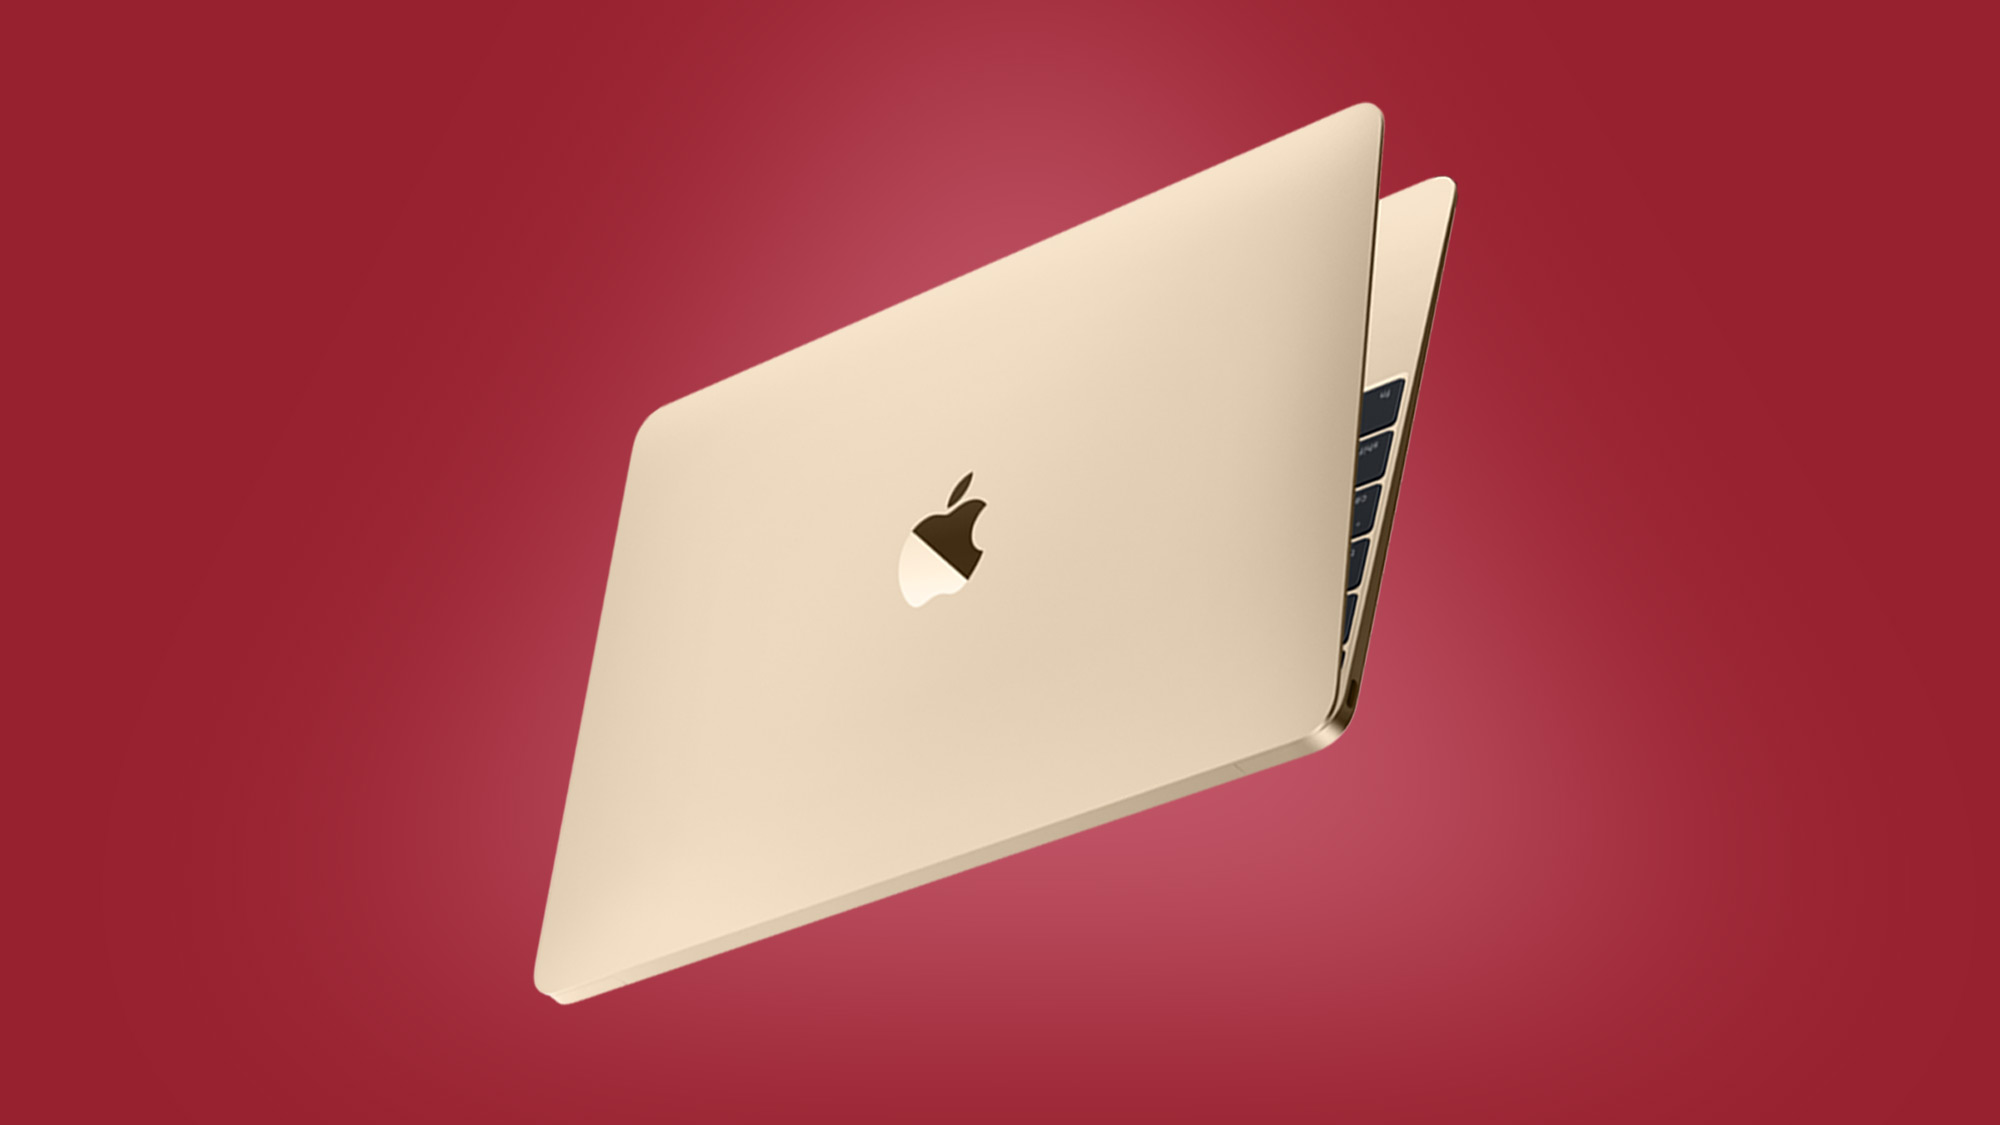 Best Price For Mac Book Pro